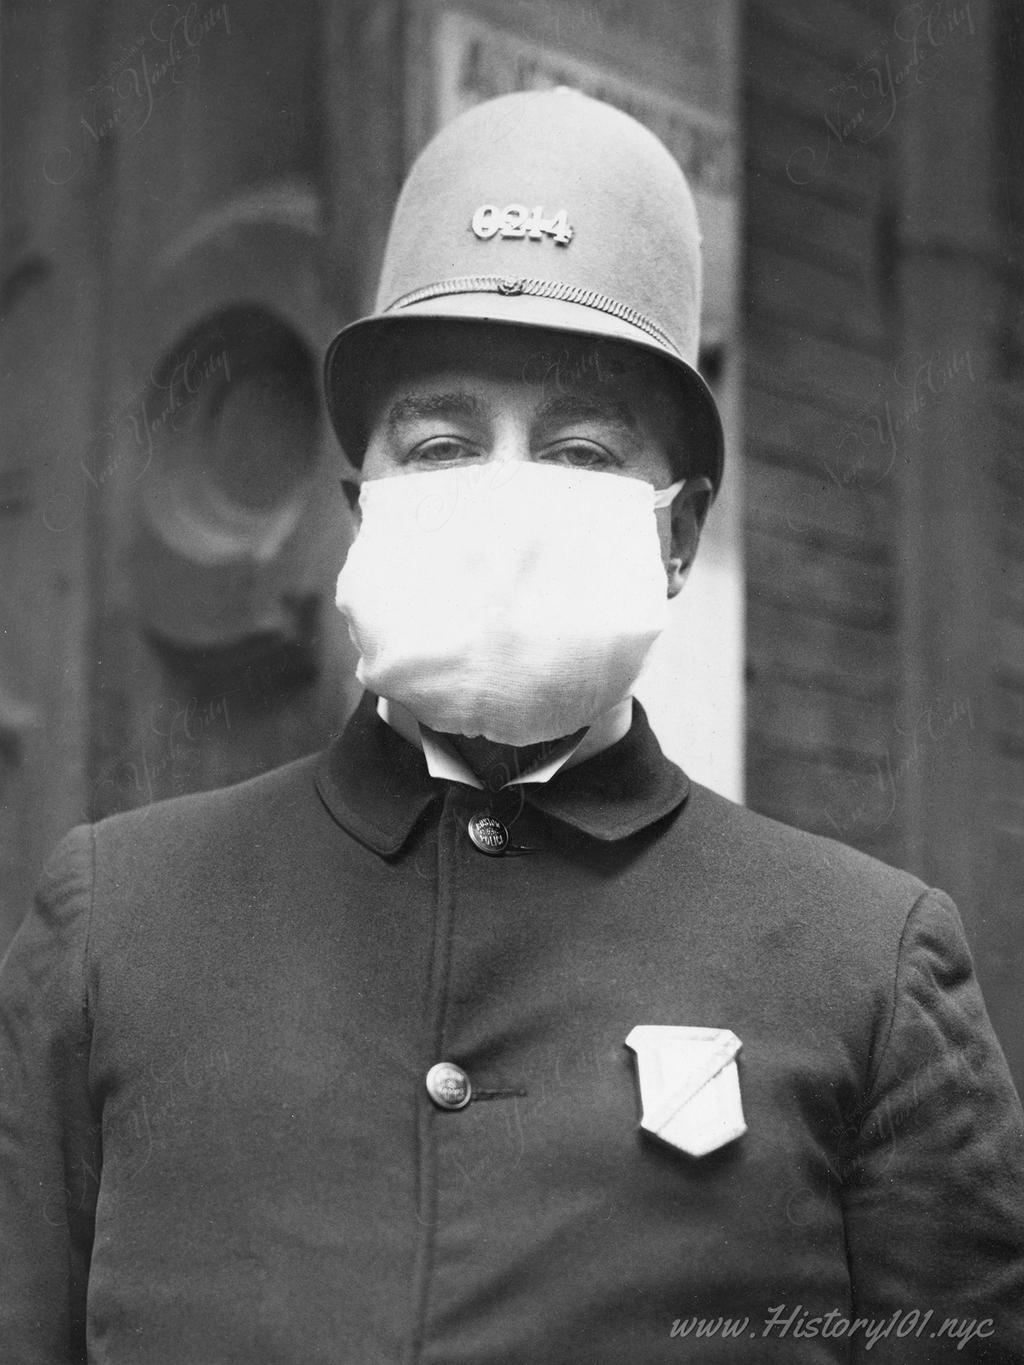 Photograph of a policeman wearing a mask during the Spanish Flu pandemic. 1700 of these masks were distributed to police throughout the city for protection.